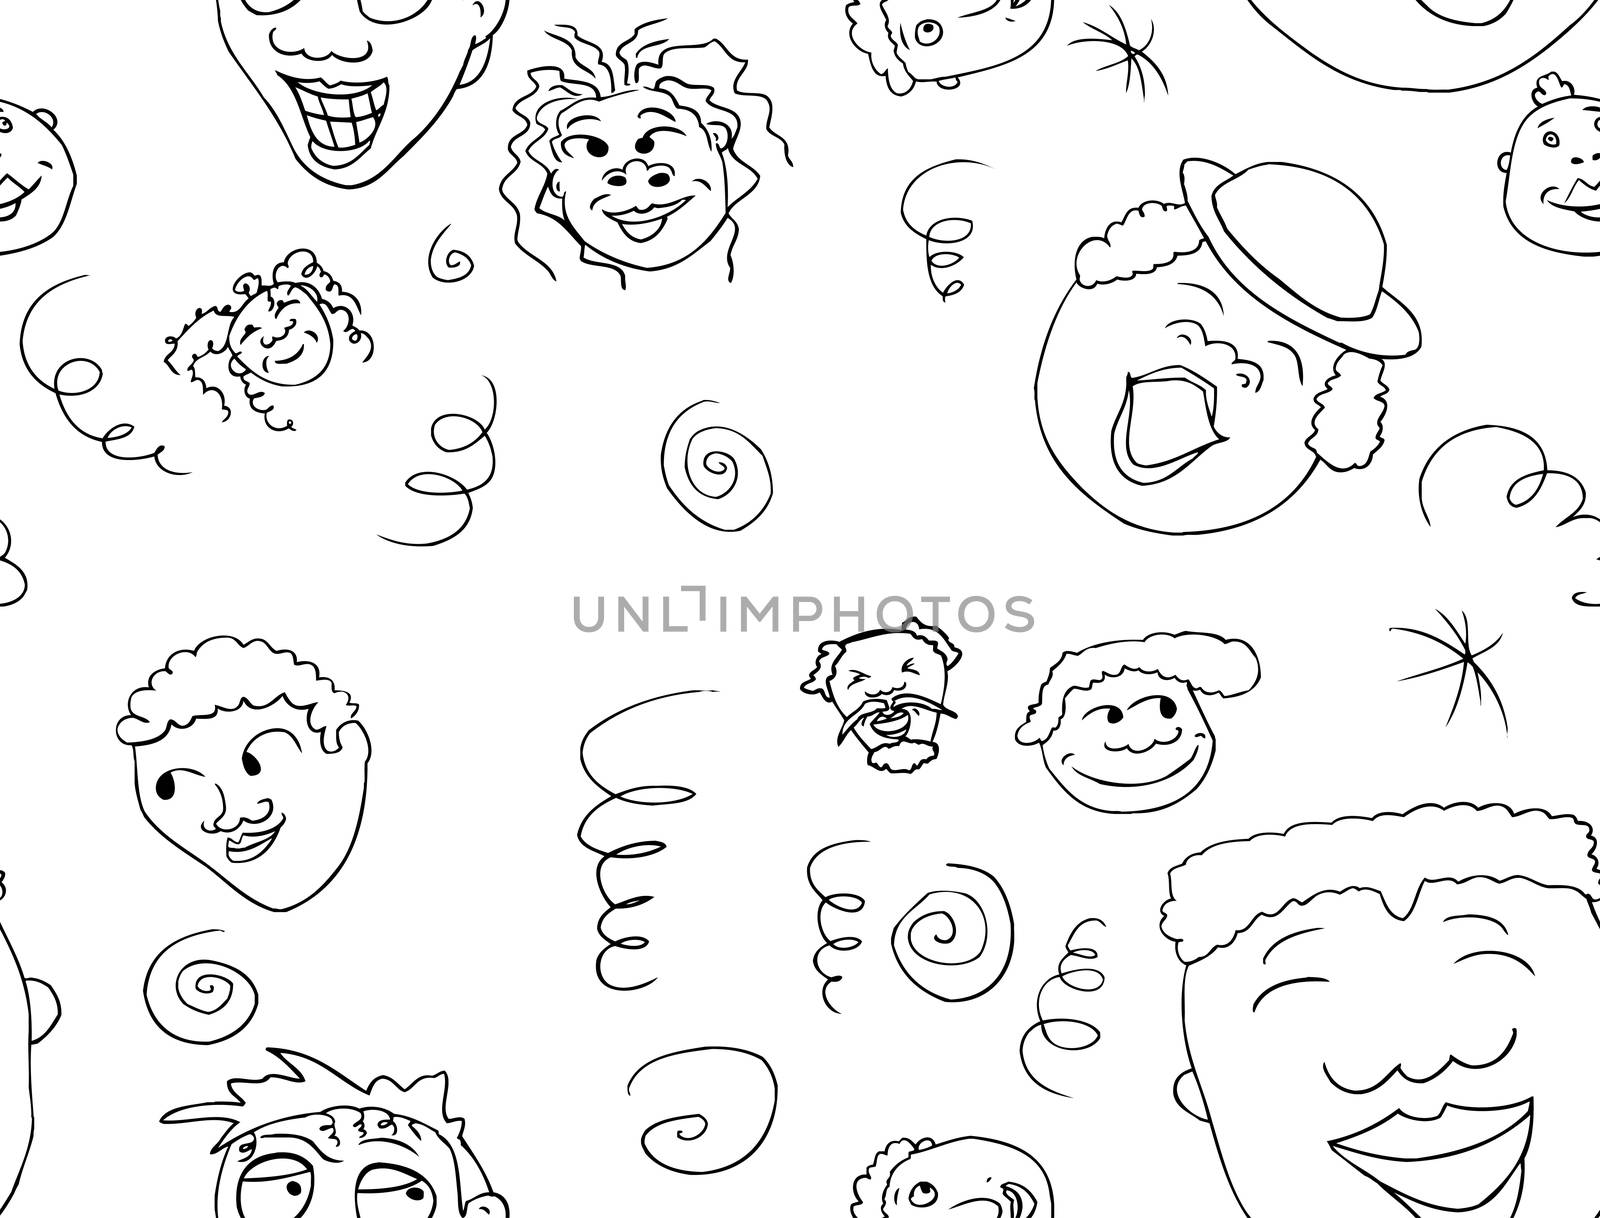 Outlined pattern of faces with positive expressions